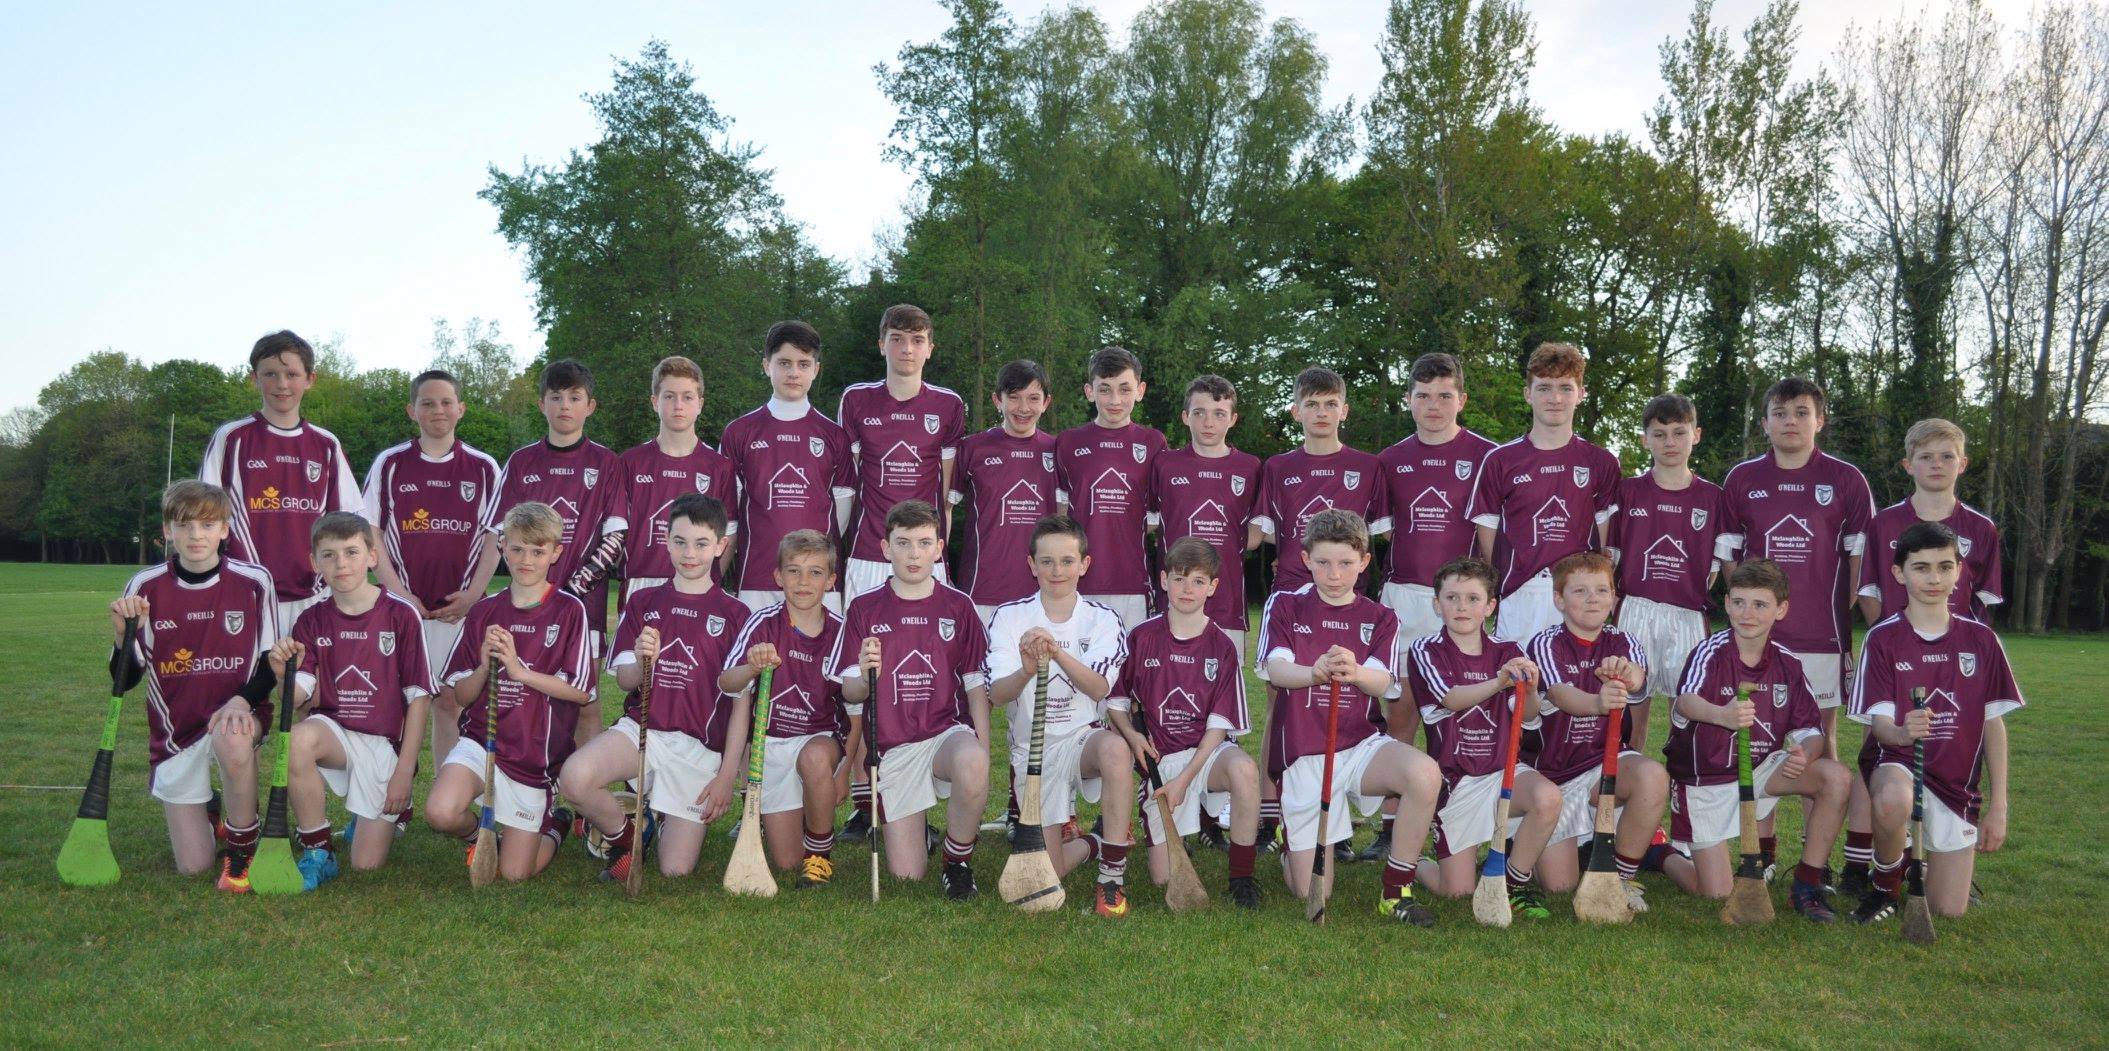 U14 Hurlers heading to Wexford for Feile finals